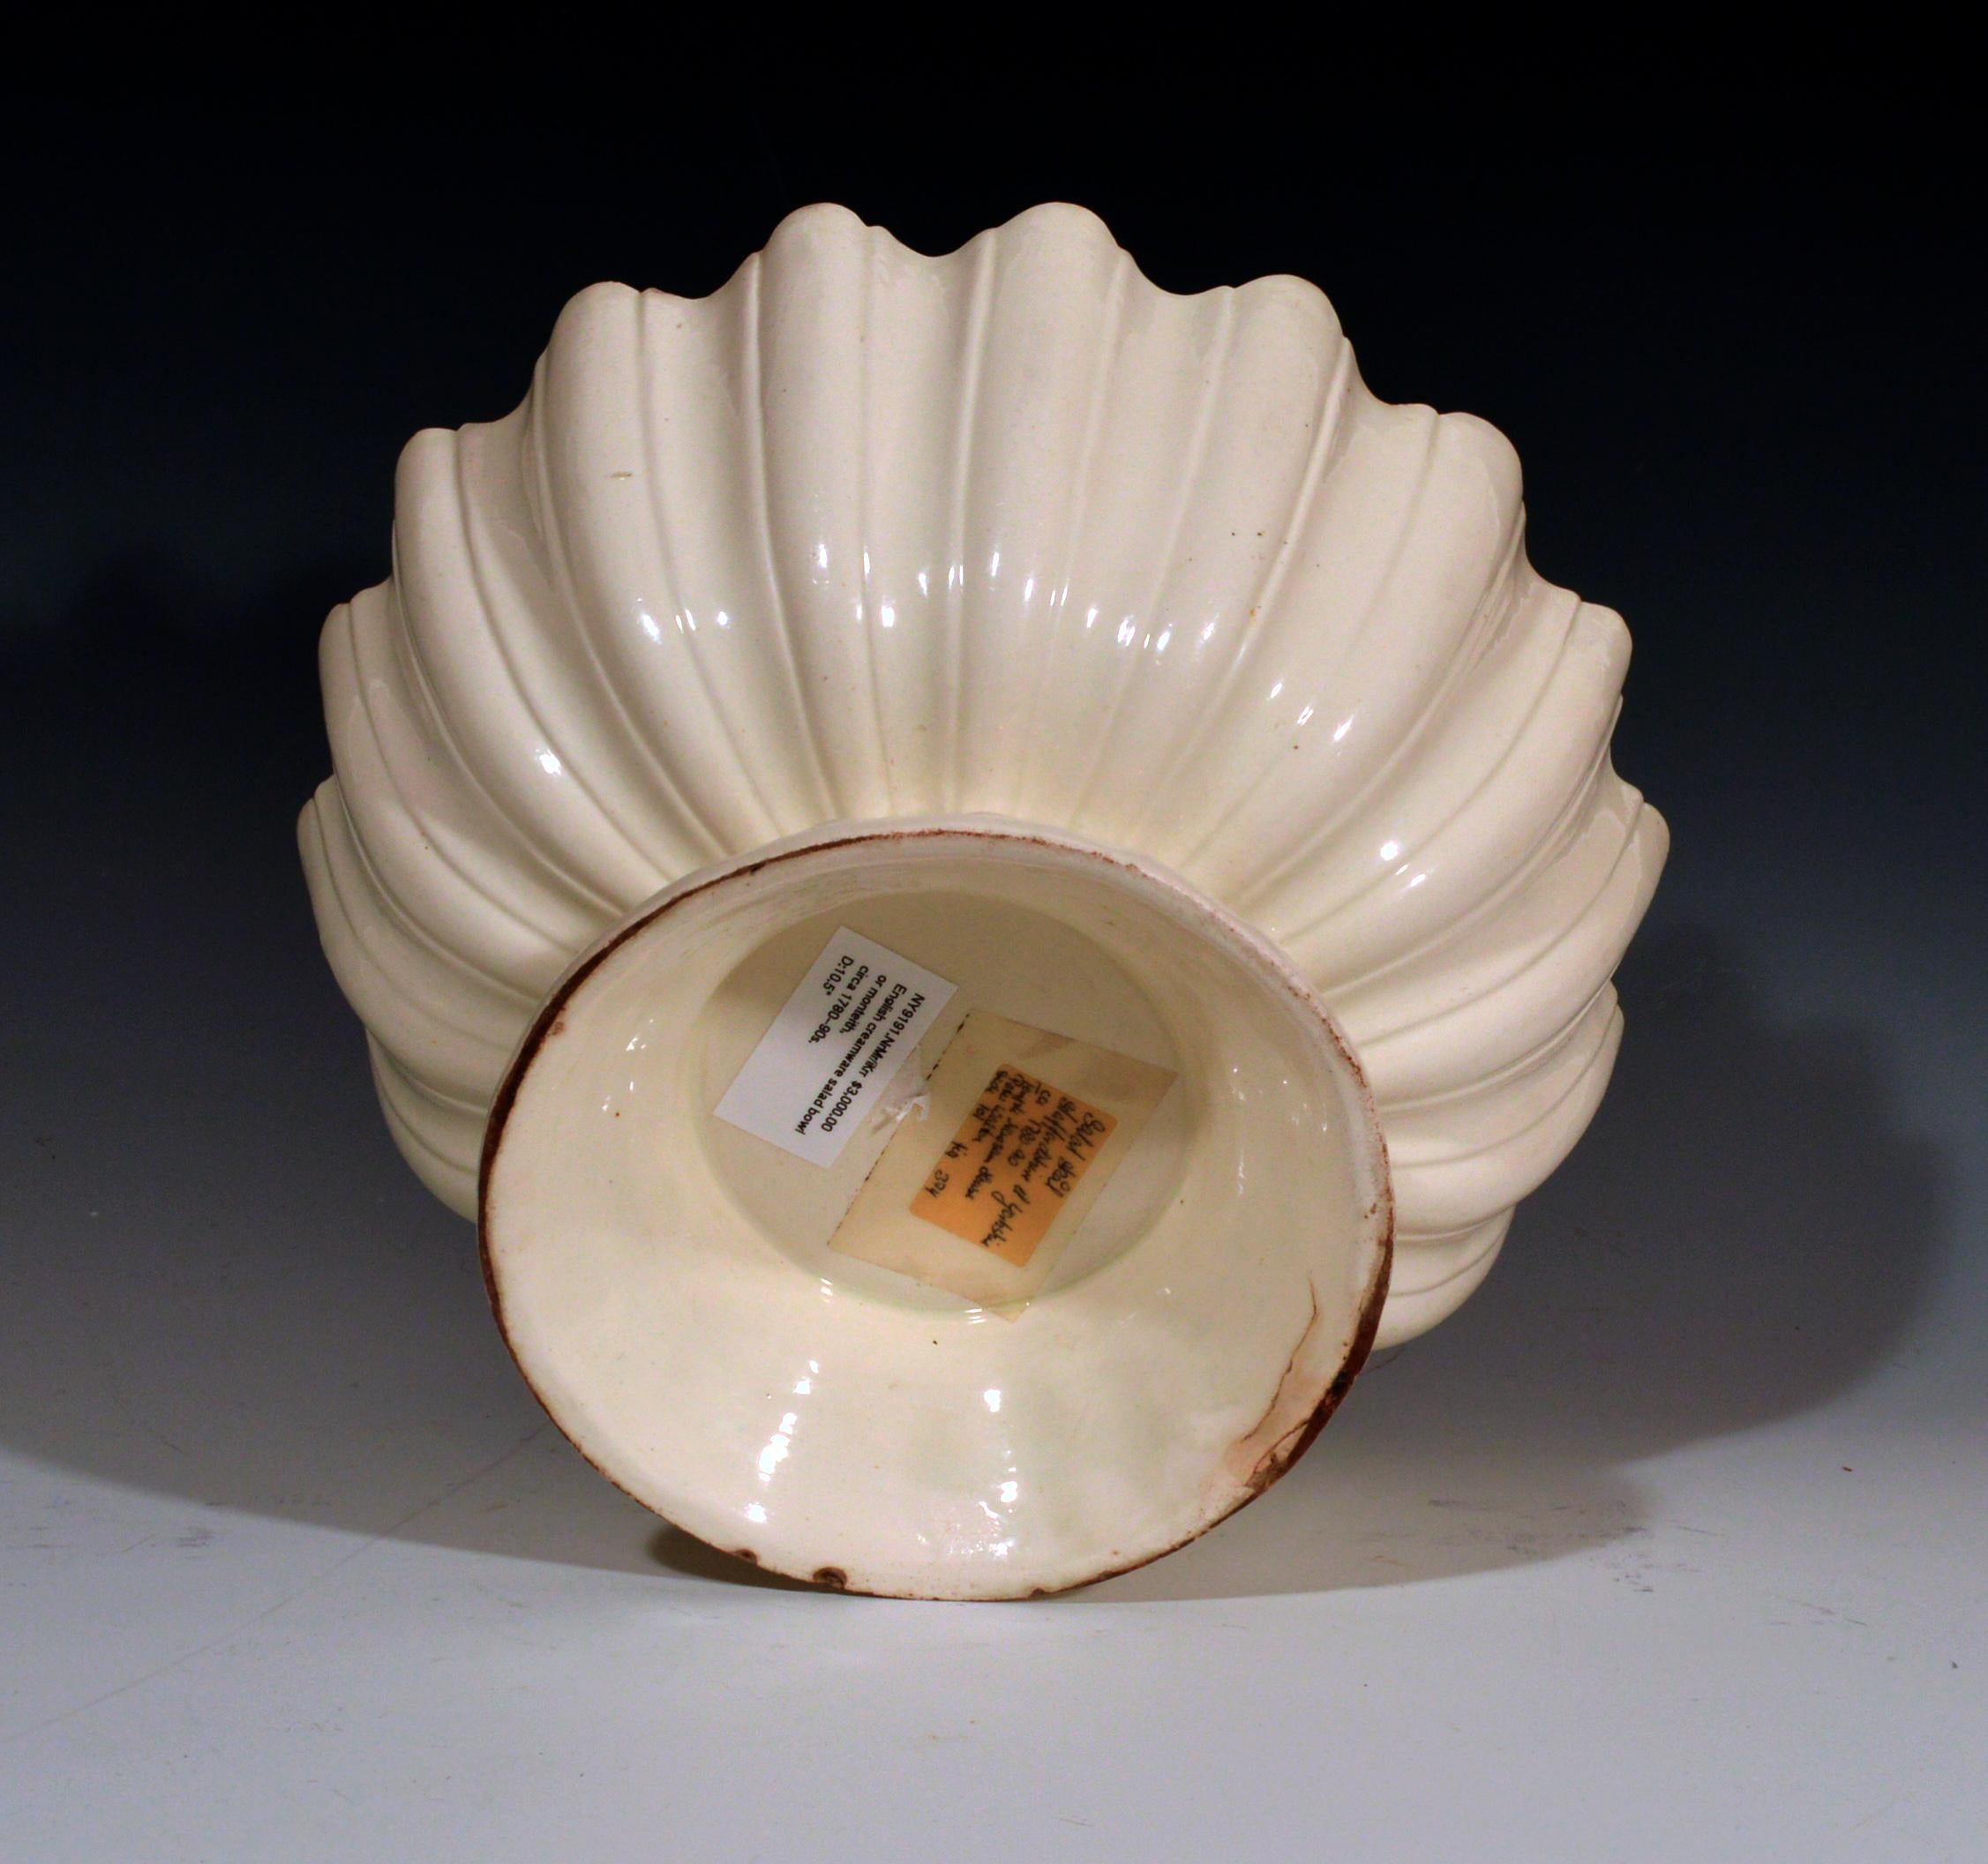 Large English pottery circular plain creamware fruit bowl,
circa 1780s-1790s.

A circular plain creamware salad bowl with a raised hollow foot and fluted sides like a silver monteith.

Dimensions: 10 1/2 inches diameter x 5 3/4 inches